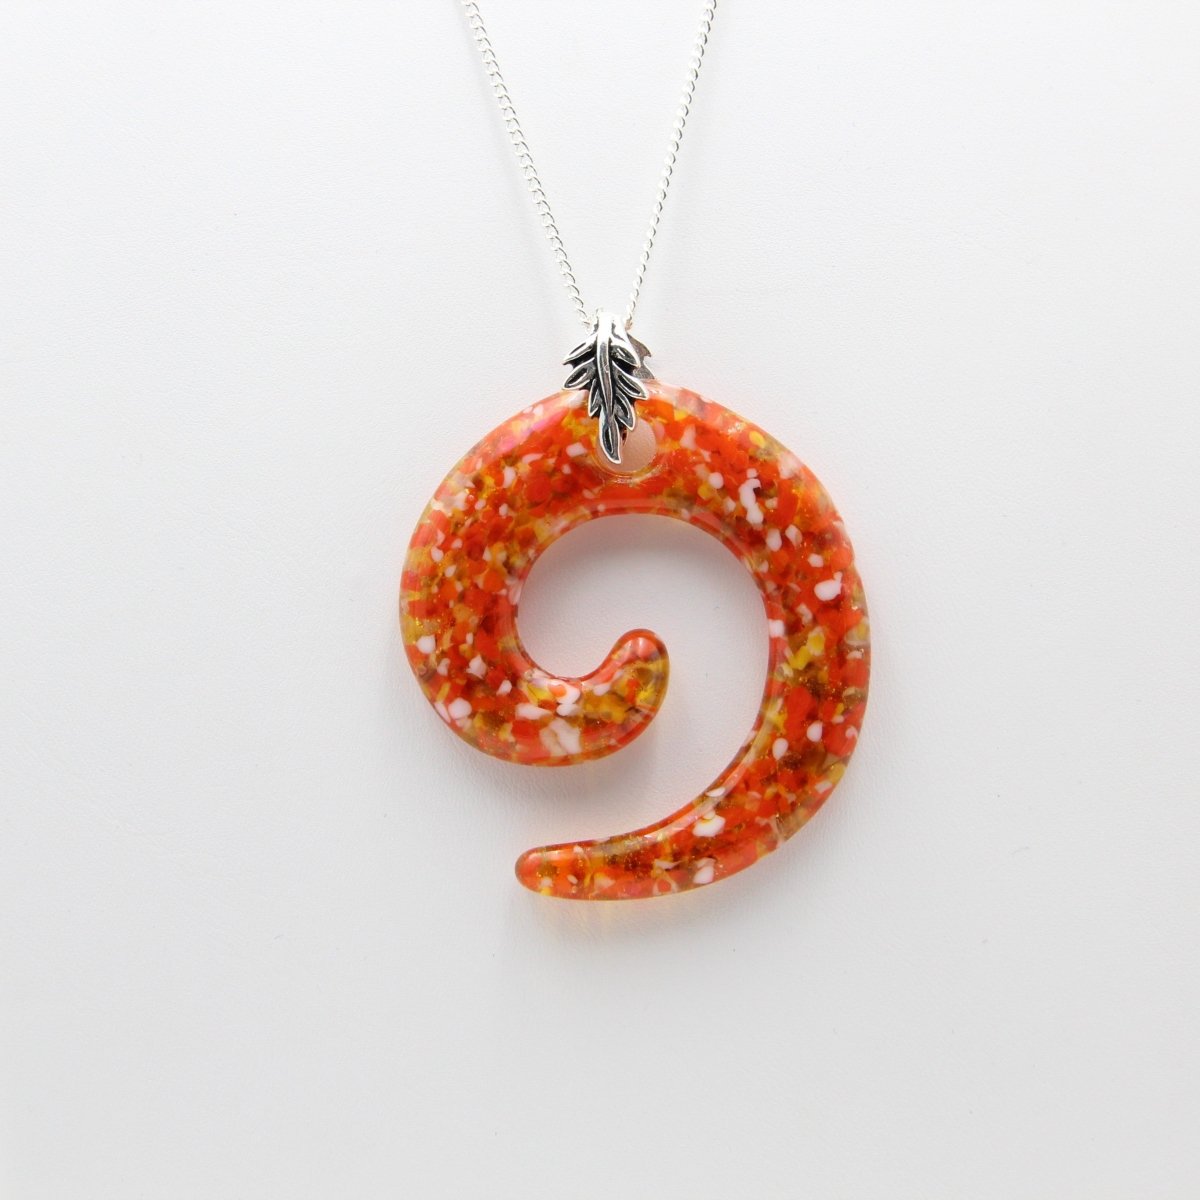 Speckled Orange and Yellow Glass Pendant